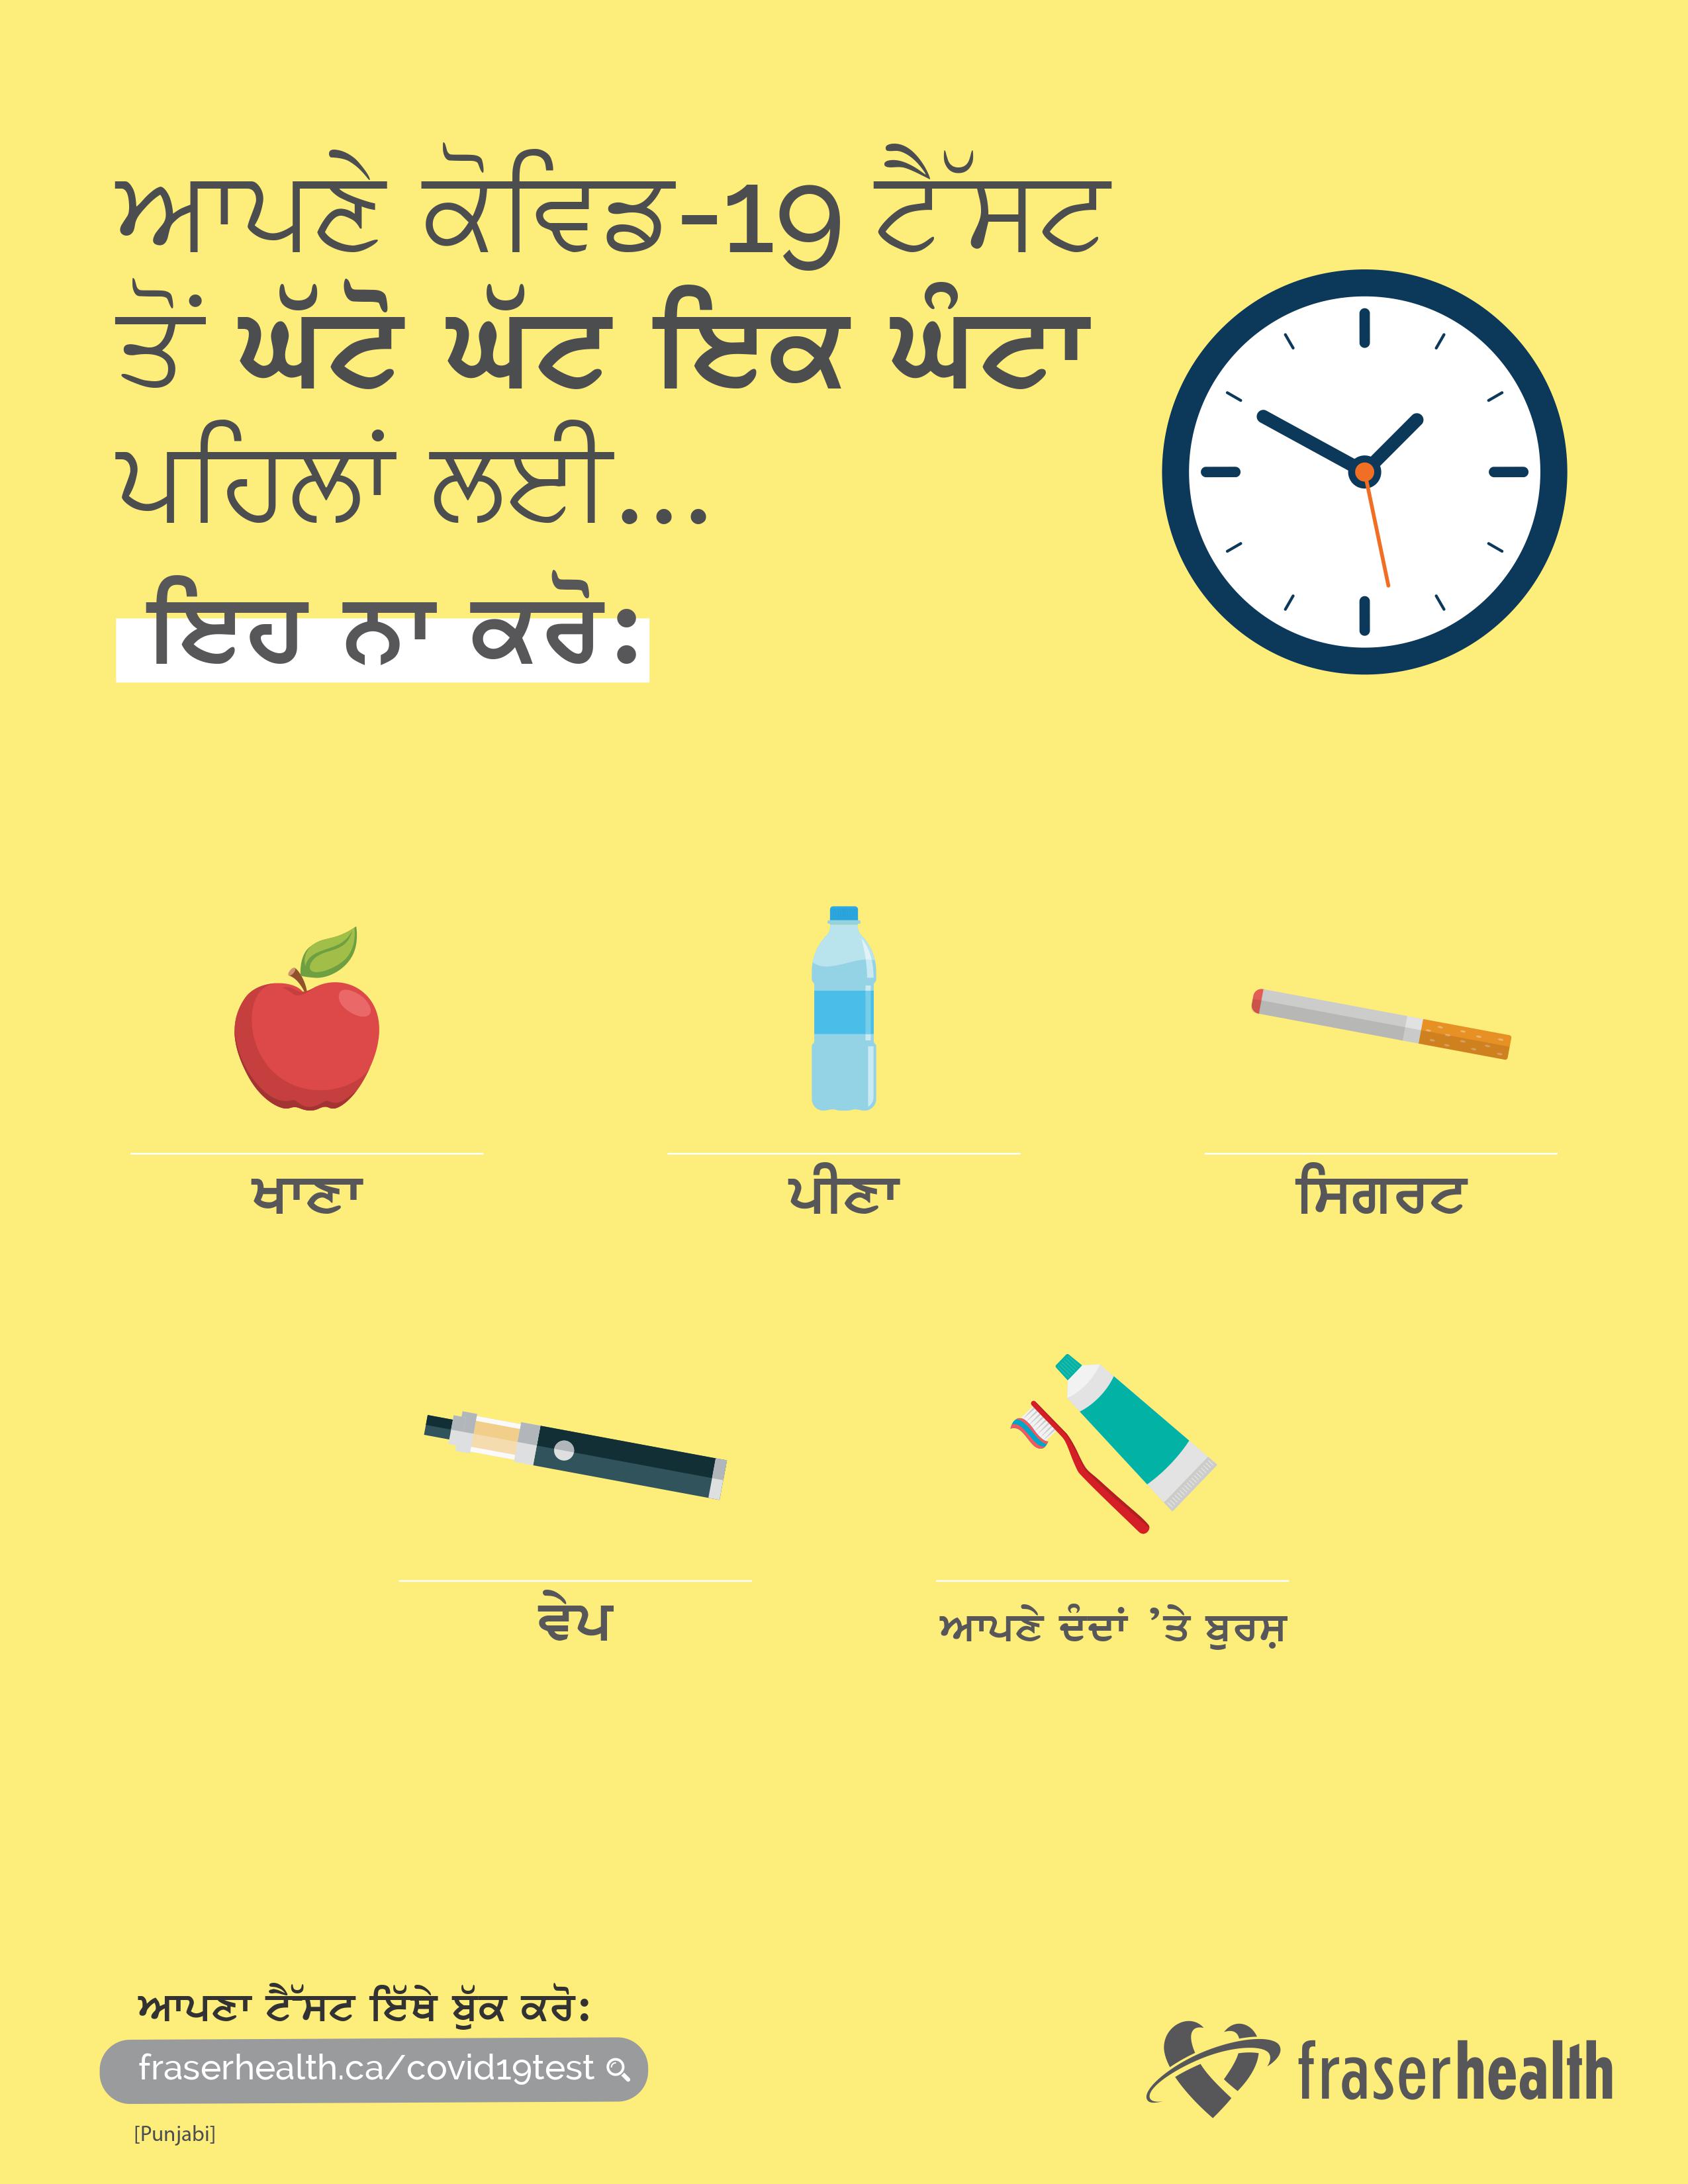 Instructions on how to prepare for your COVID-19 test in Punjabi